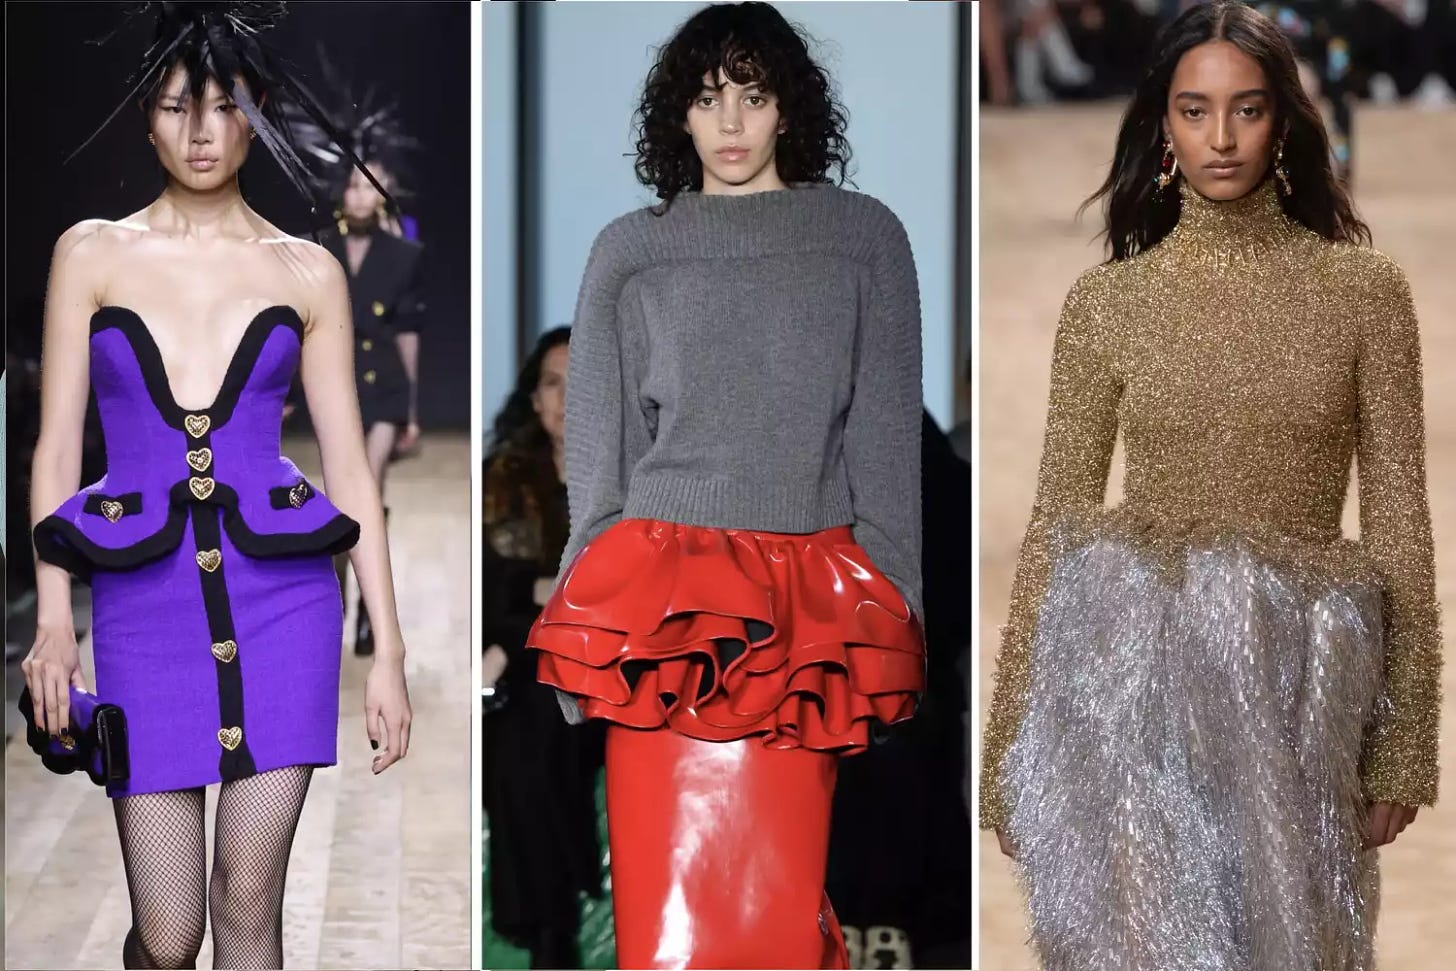 Peplums, one of the best 2023 fall fashion trends, worn by models in Moschino, Christopher Kane, Paco Rabanne Fall/Winter 2023/2024 runway shows.